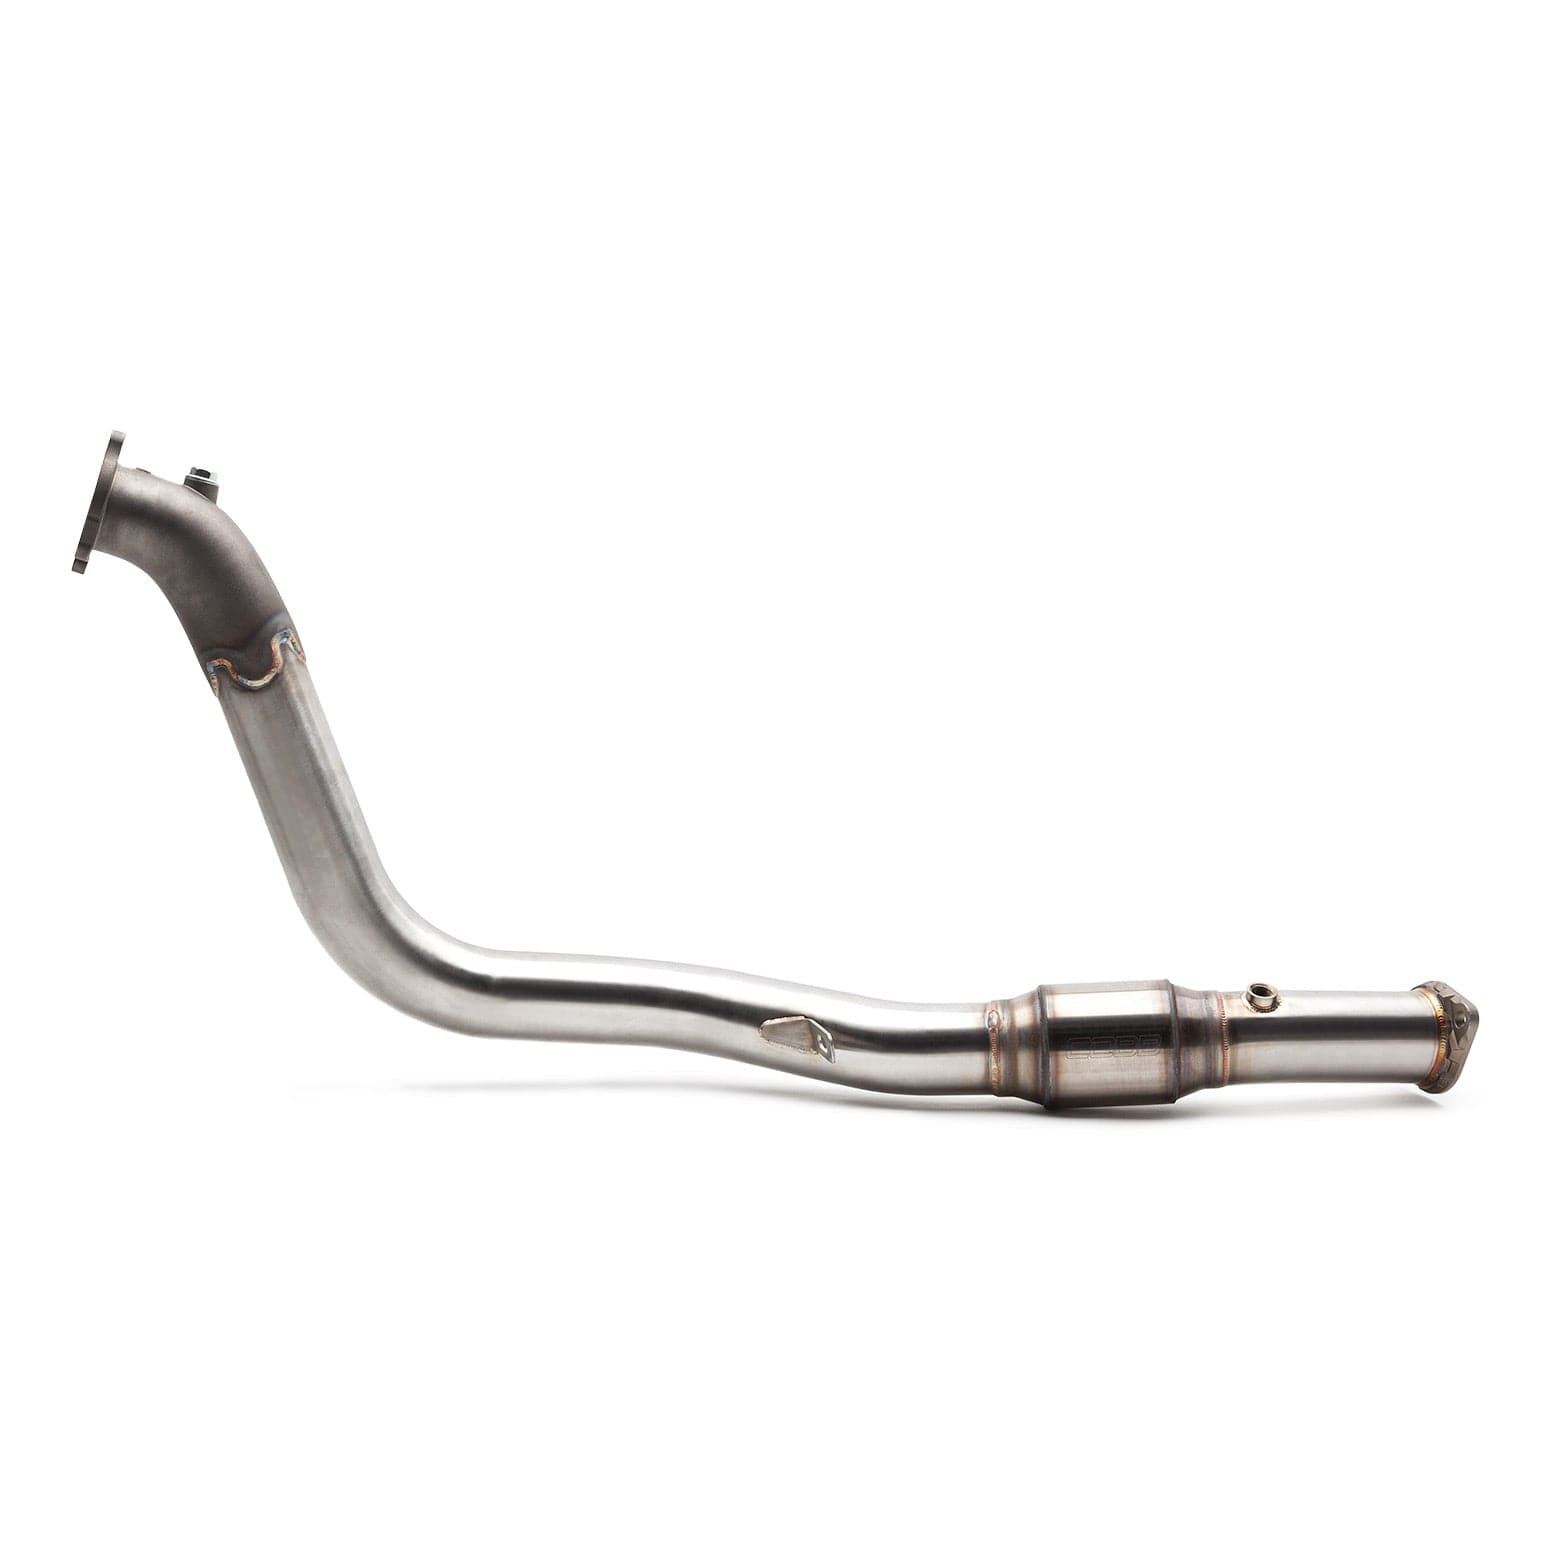 Cobb Tuning GESi 3-Inch Catted Downpipe - 08-14 STi, 08-14 WRX, 09-13 FXT (cobb524210)